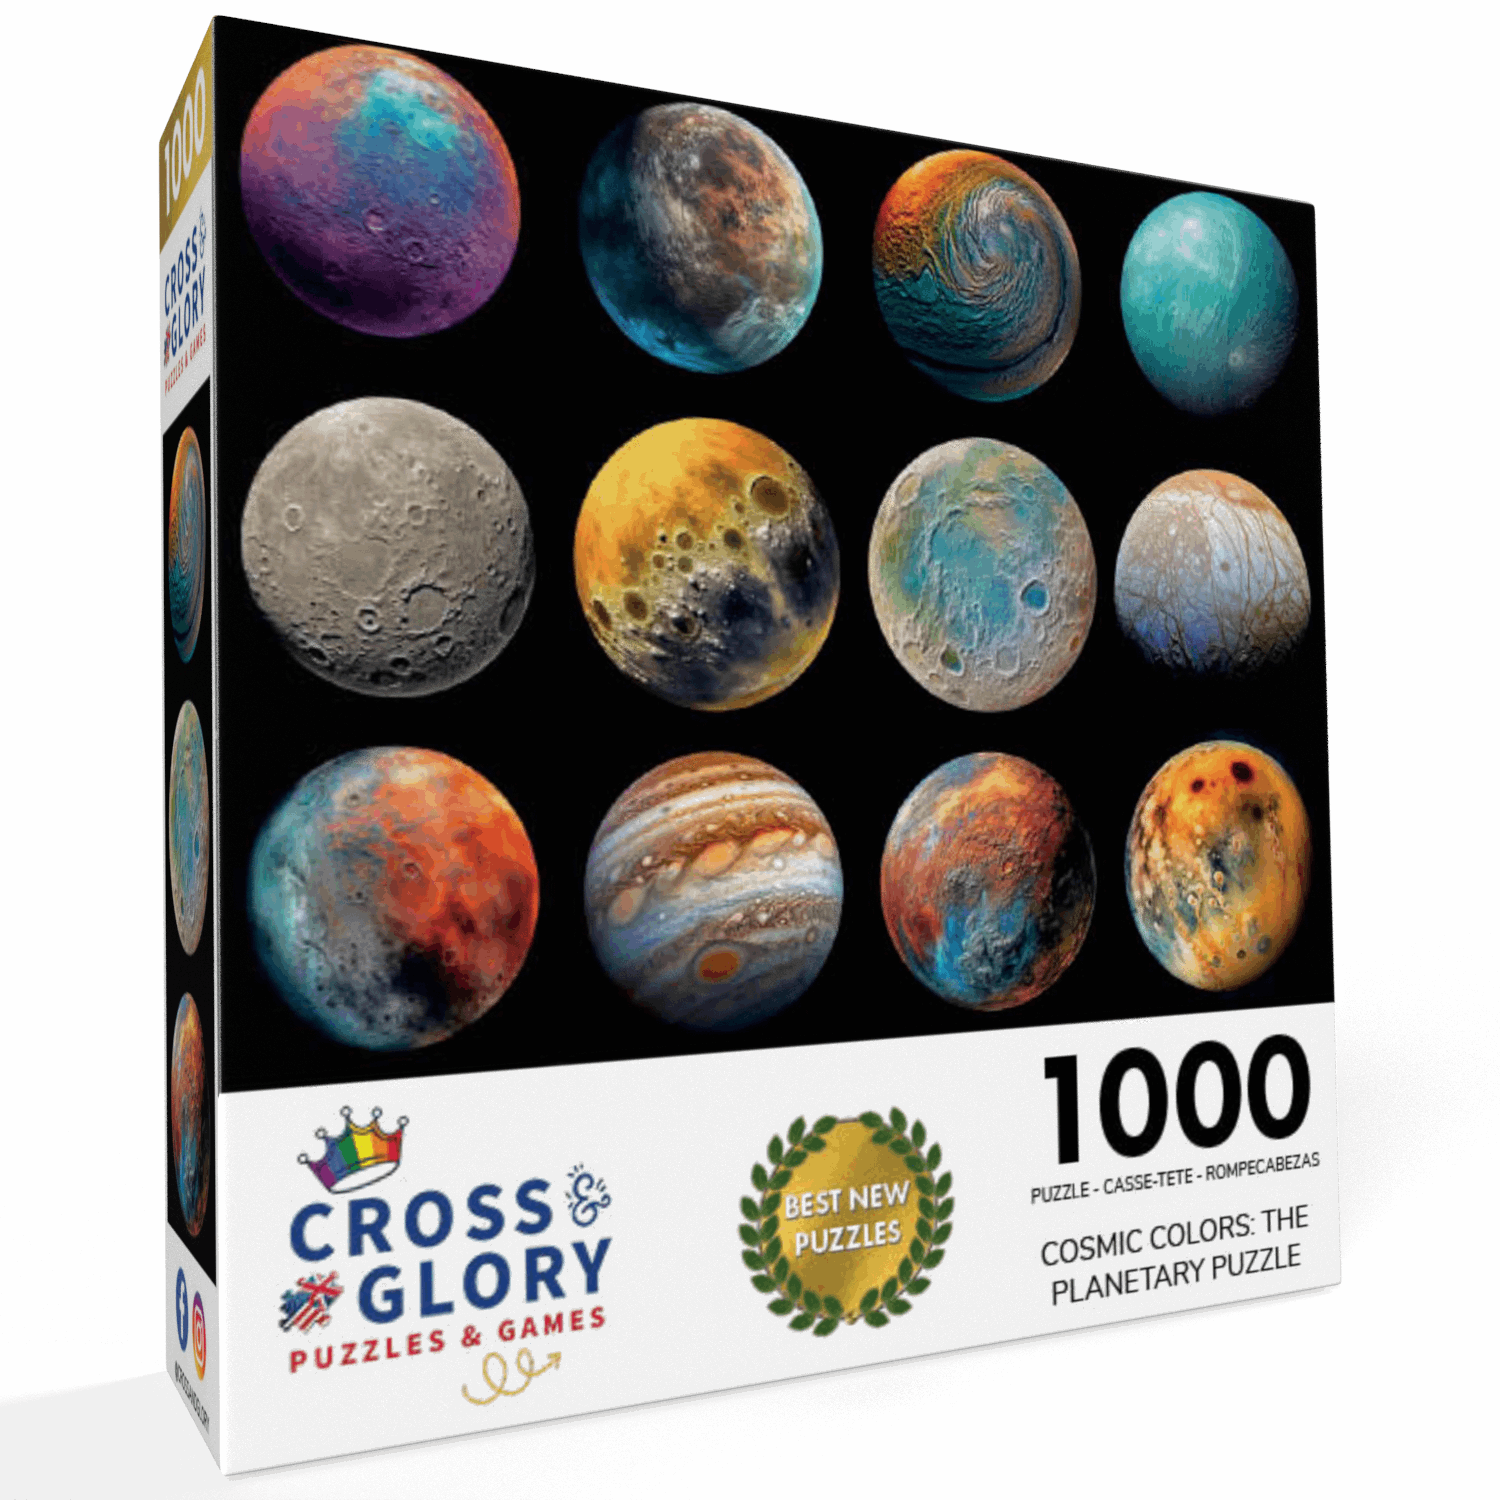 Cosmic Colors: The Planetary Puzzle - 1000 Piece Jigsaw Puzzle